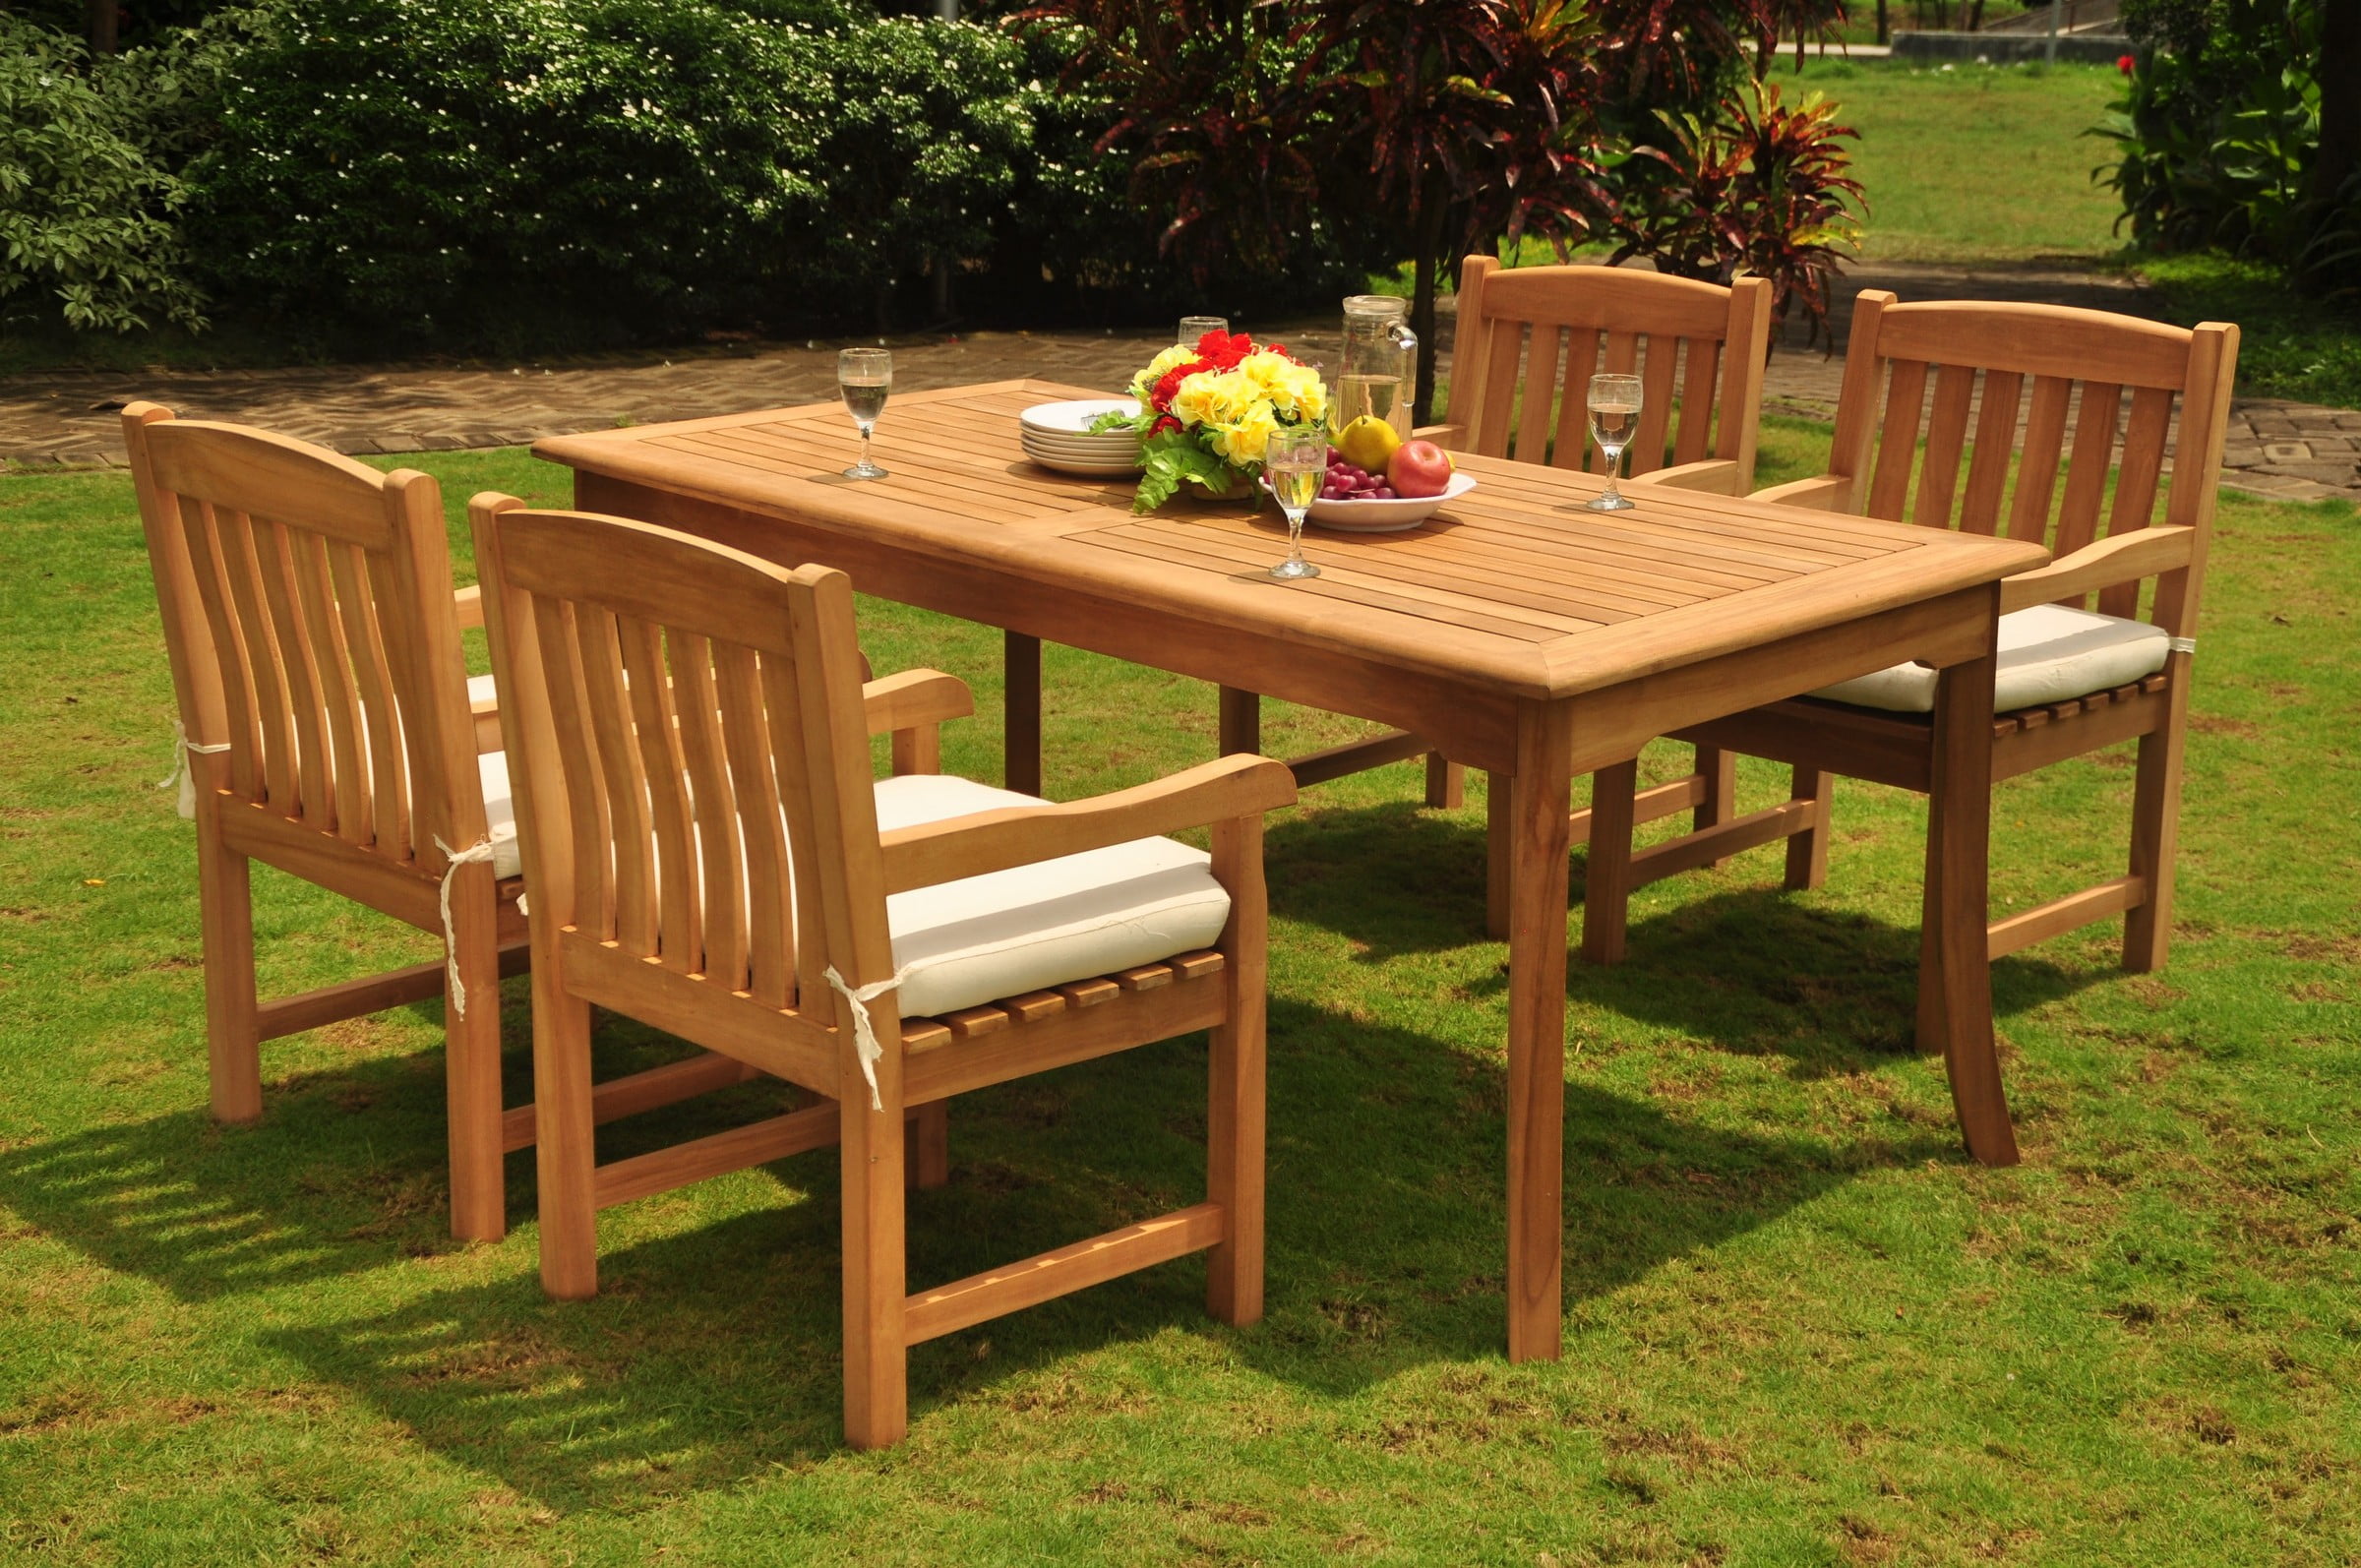 What To Look For When Buying Teak Furniture